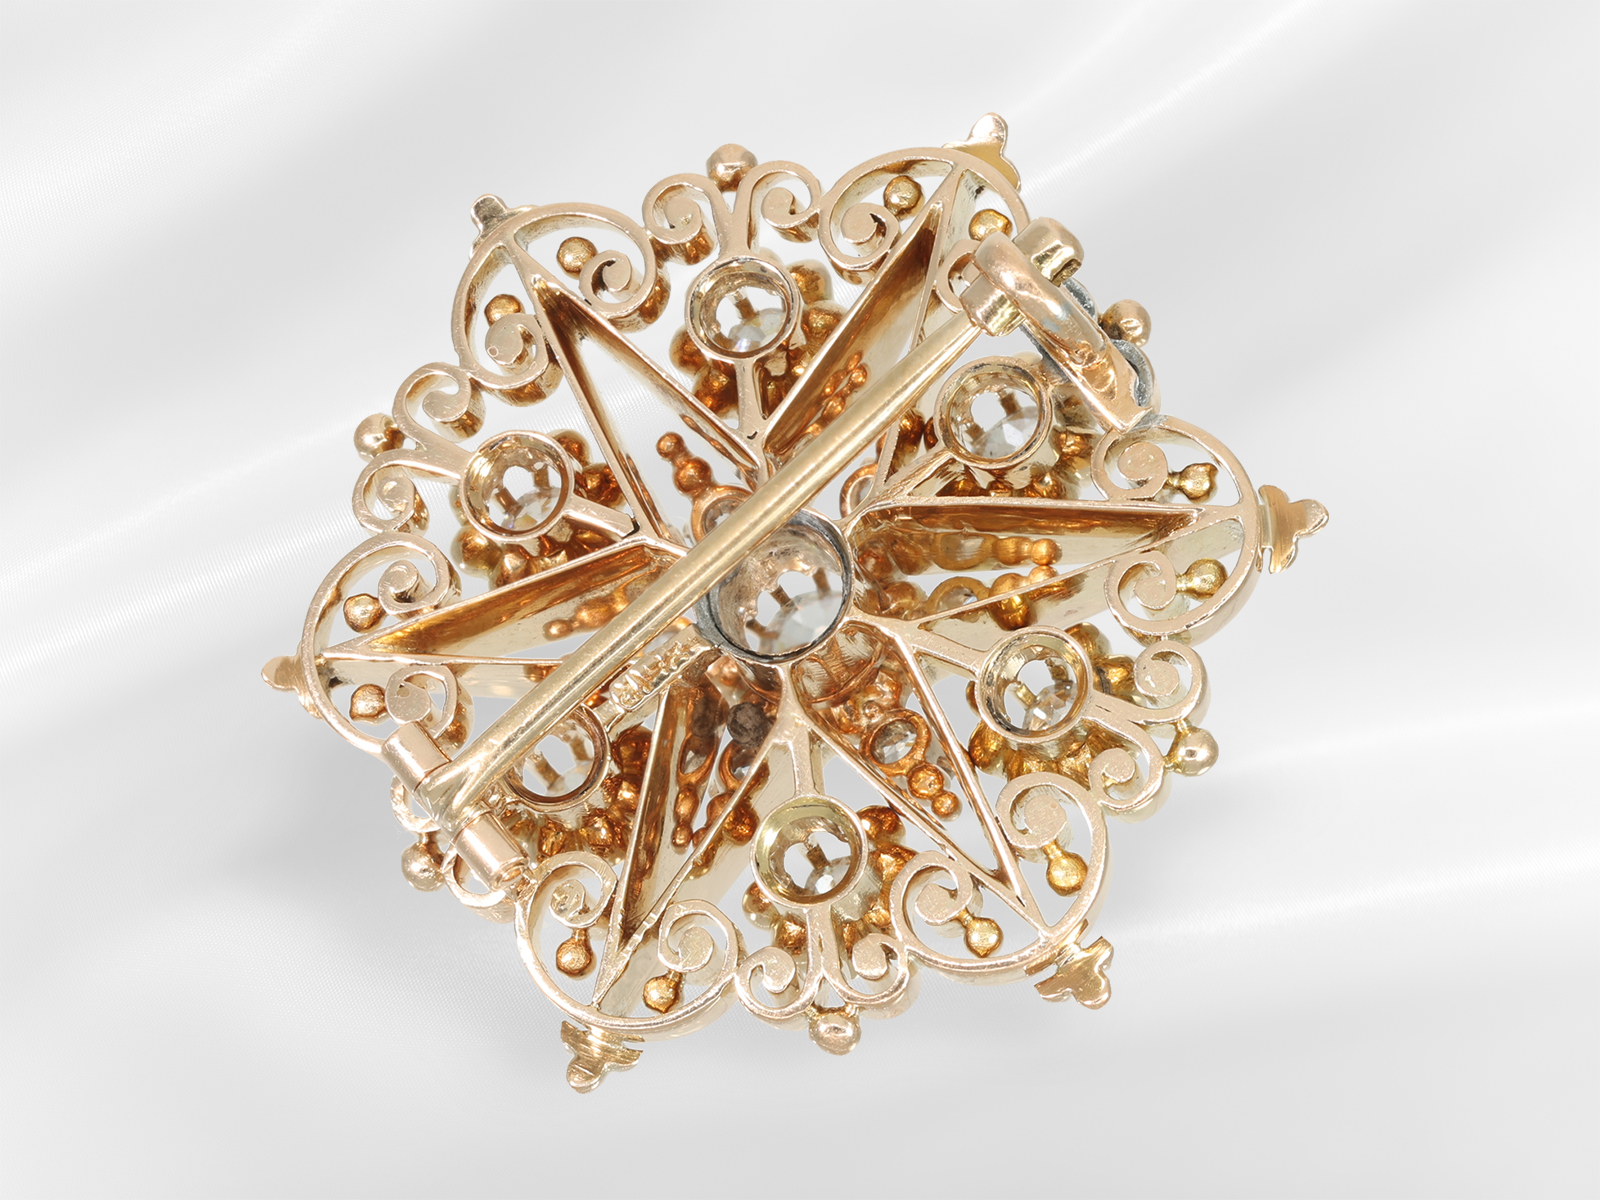 Brooch/pin: valuable old and handcrafted brooch with beautiful diamond setting, 14K gold - Image 4 of 4